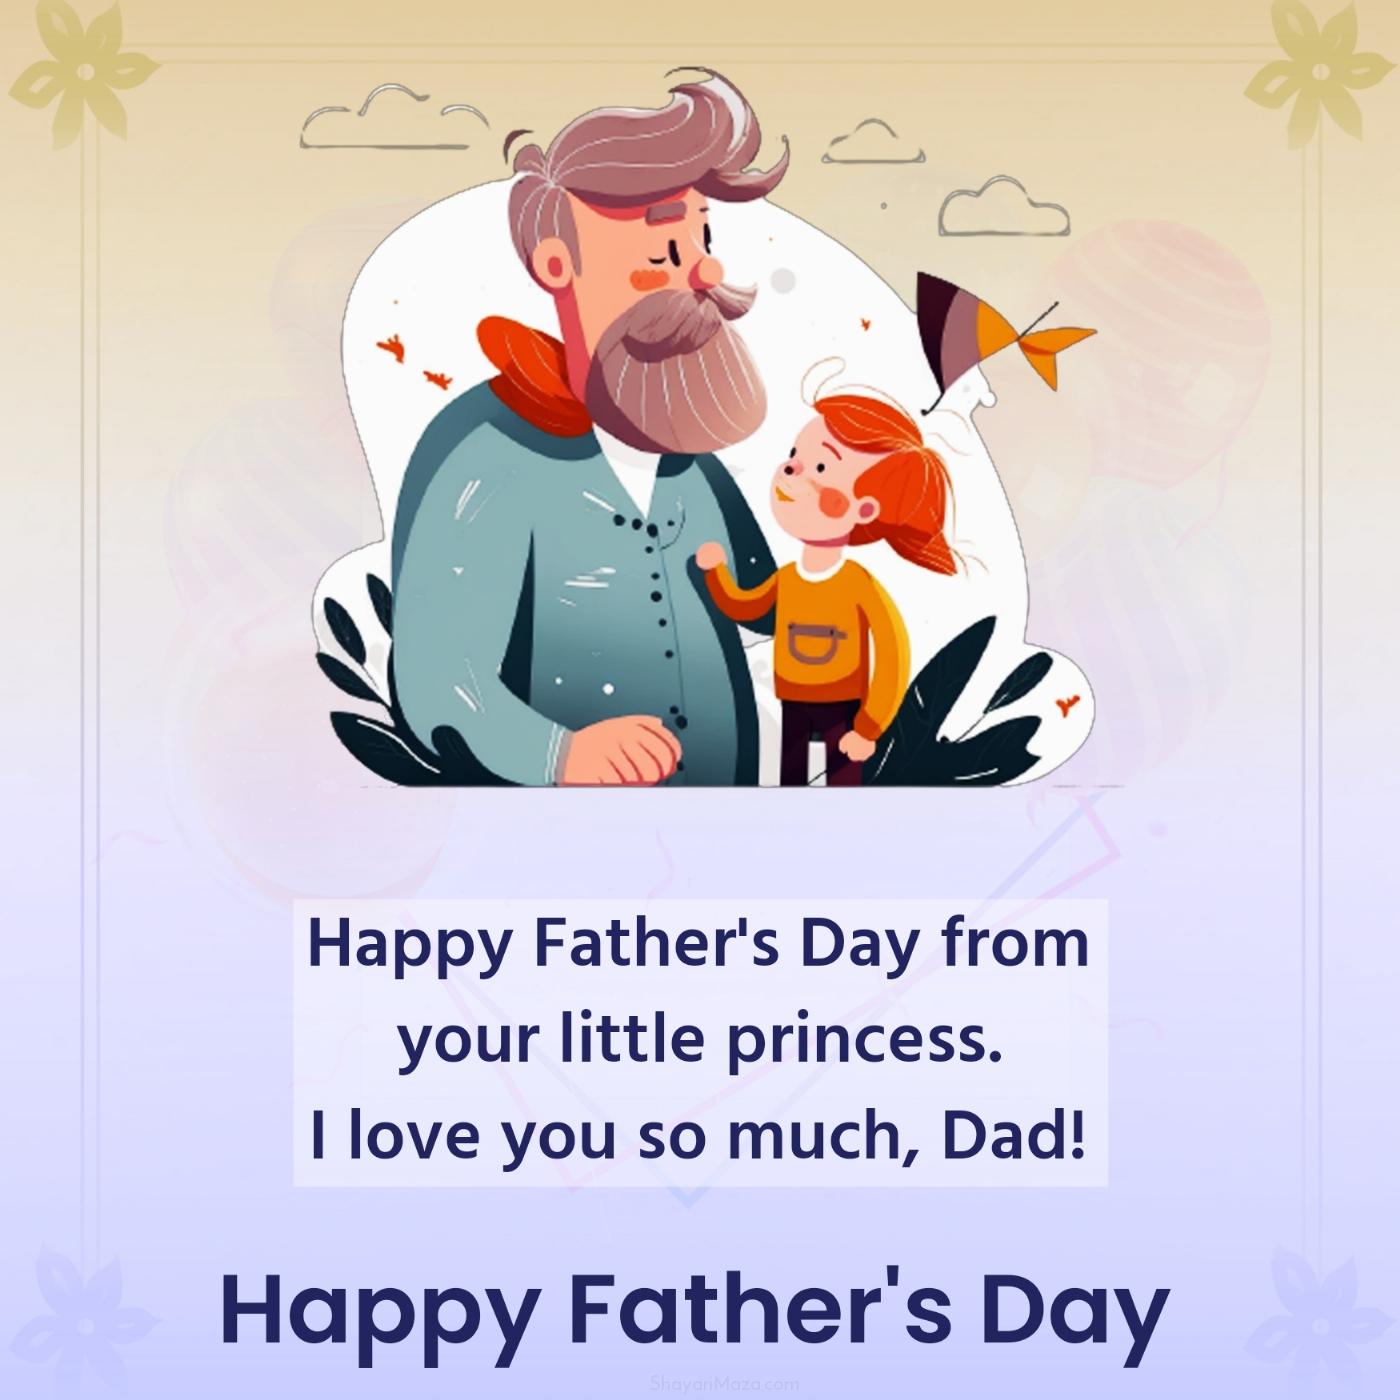 Happy Father's Day from your little princess